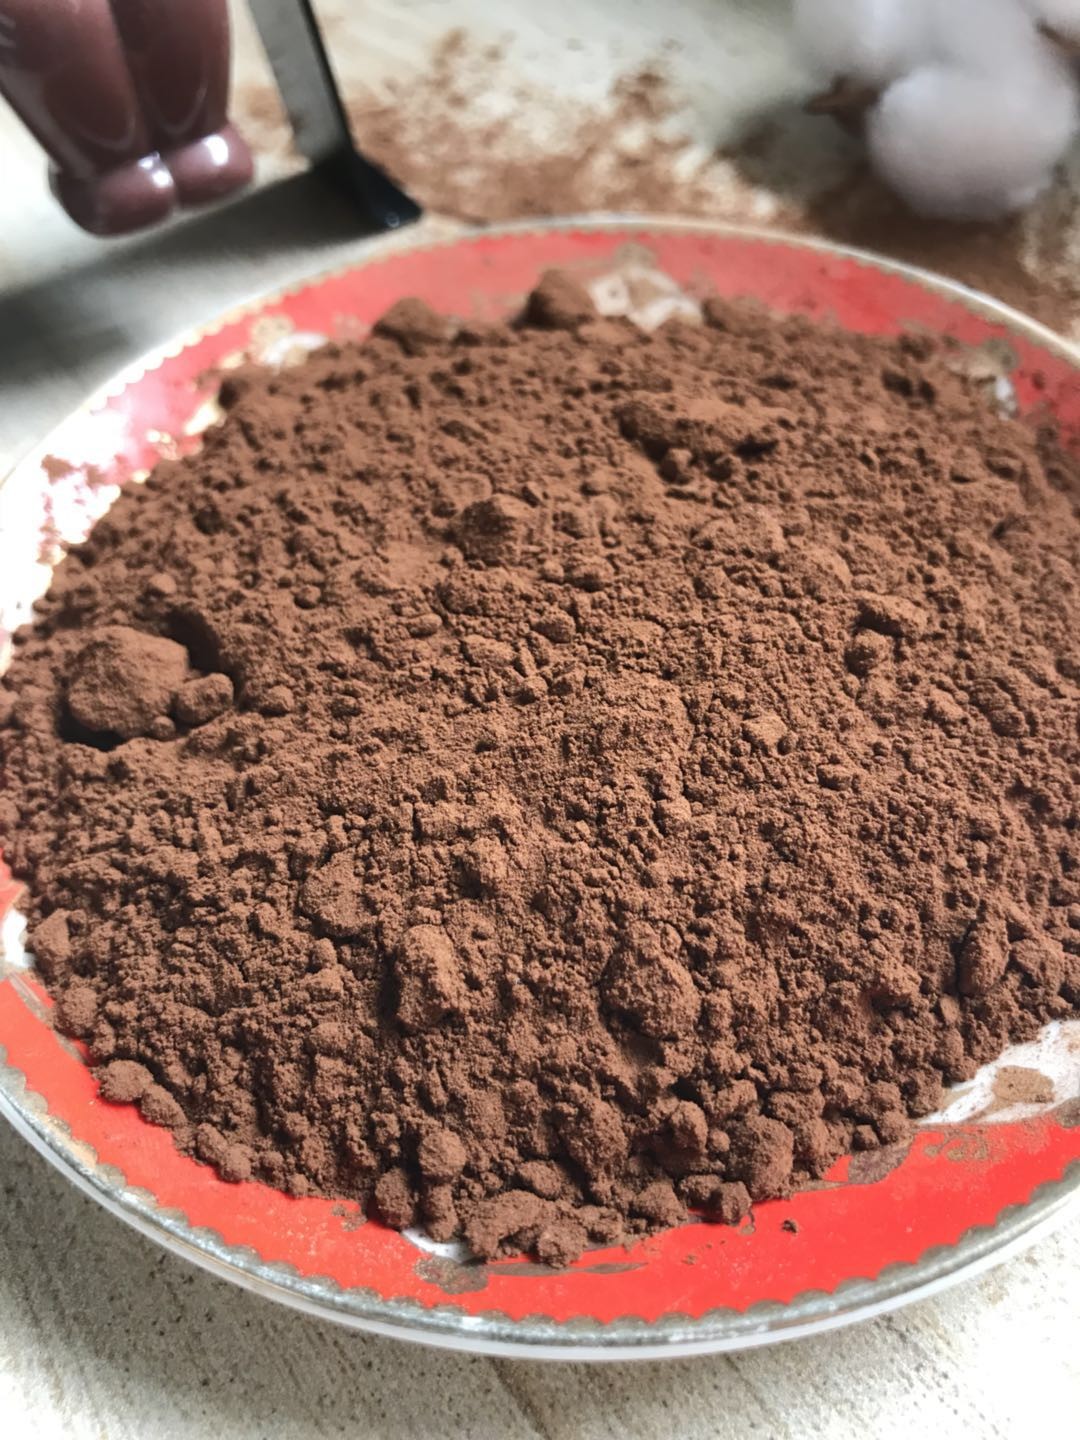 High Efficient Unsweetened Alkalized Cocoa Powder Contains Certain Amount Of Alkaloid